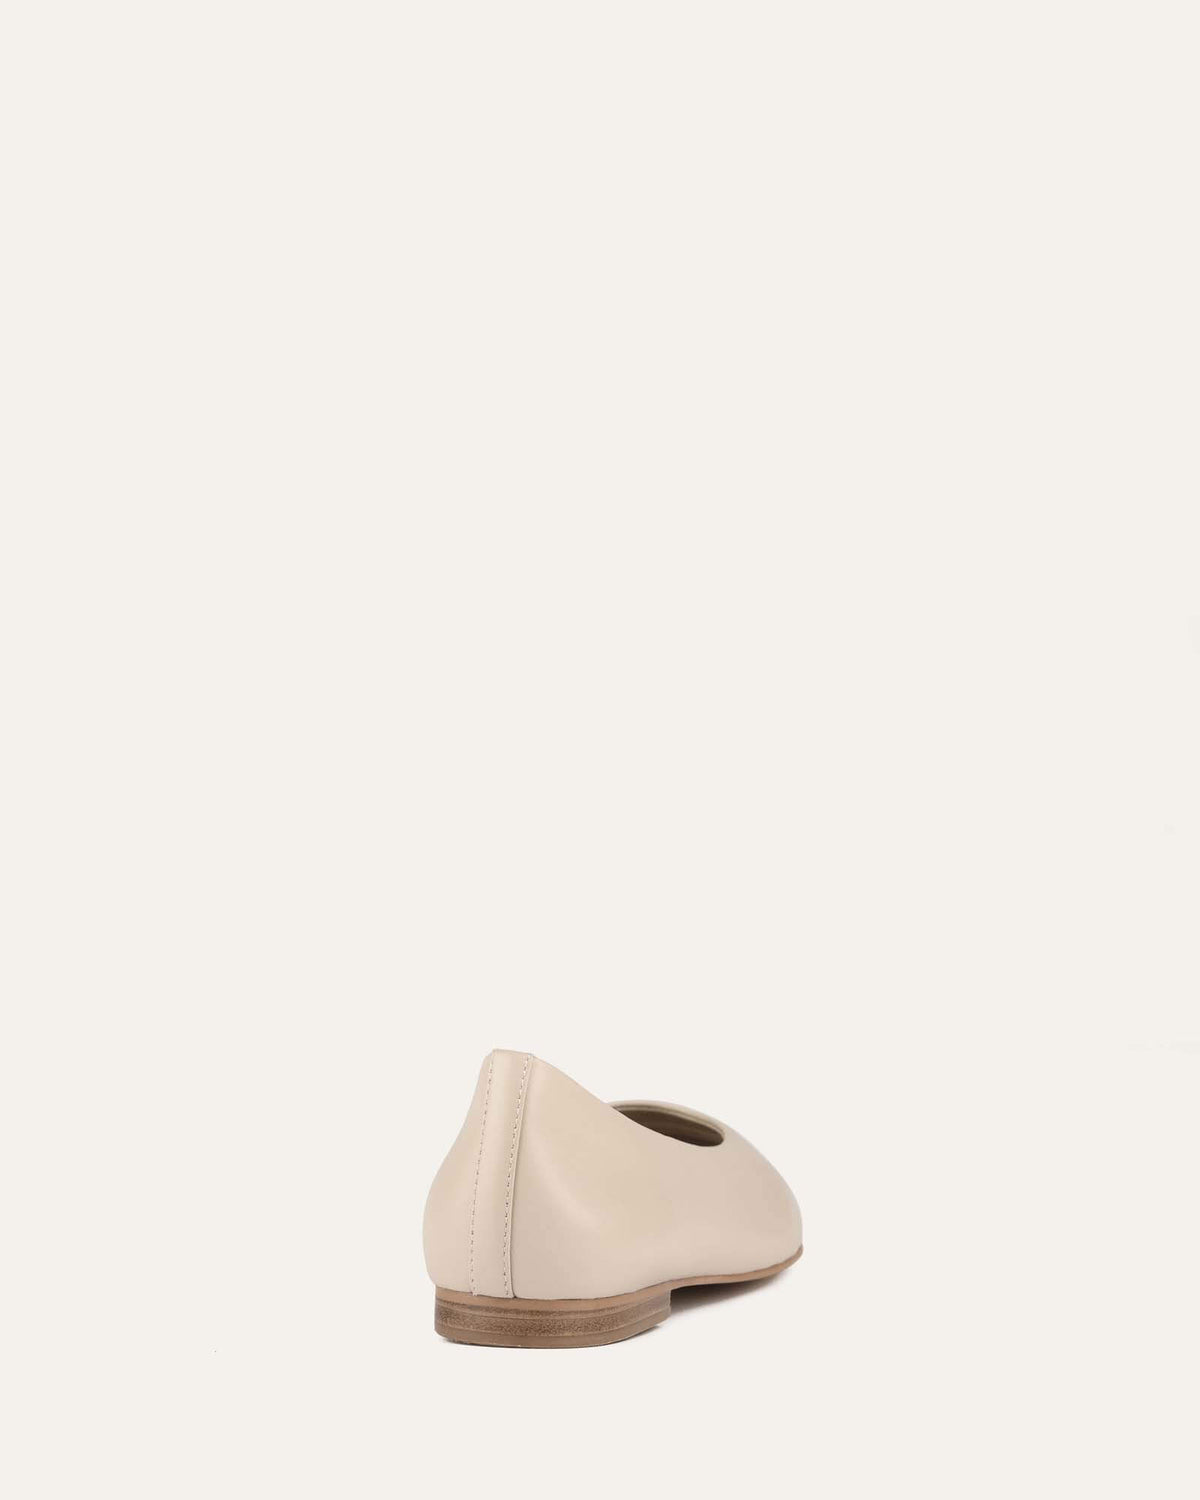 FINCH CASUAL FLATS SAND LEATHER